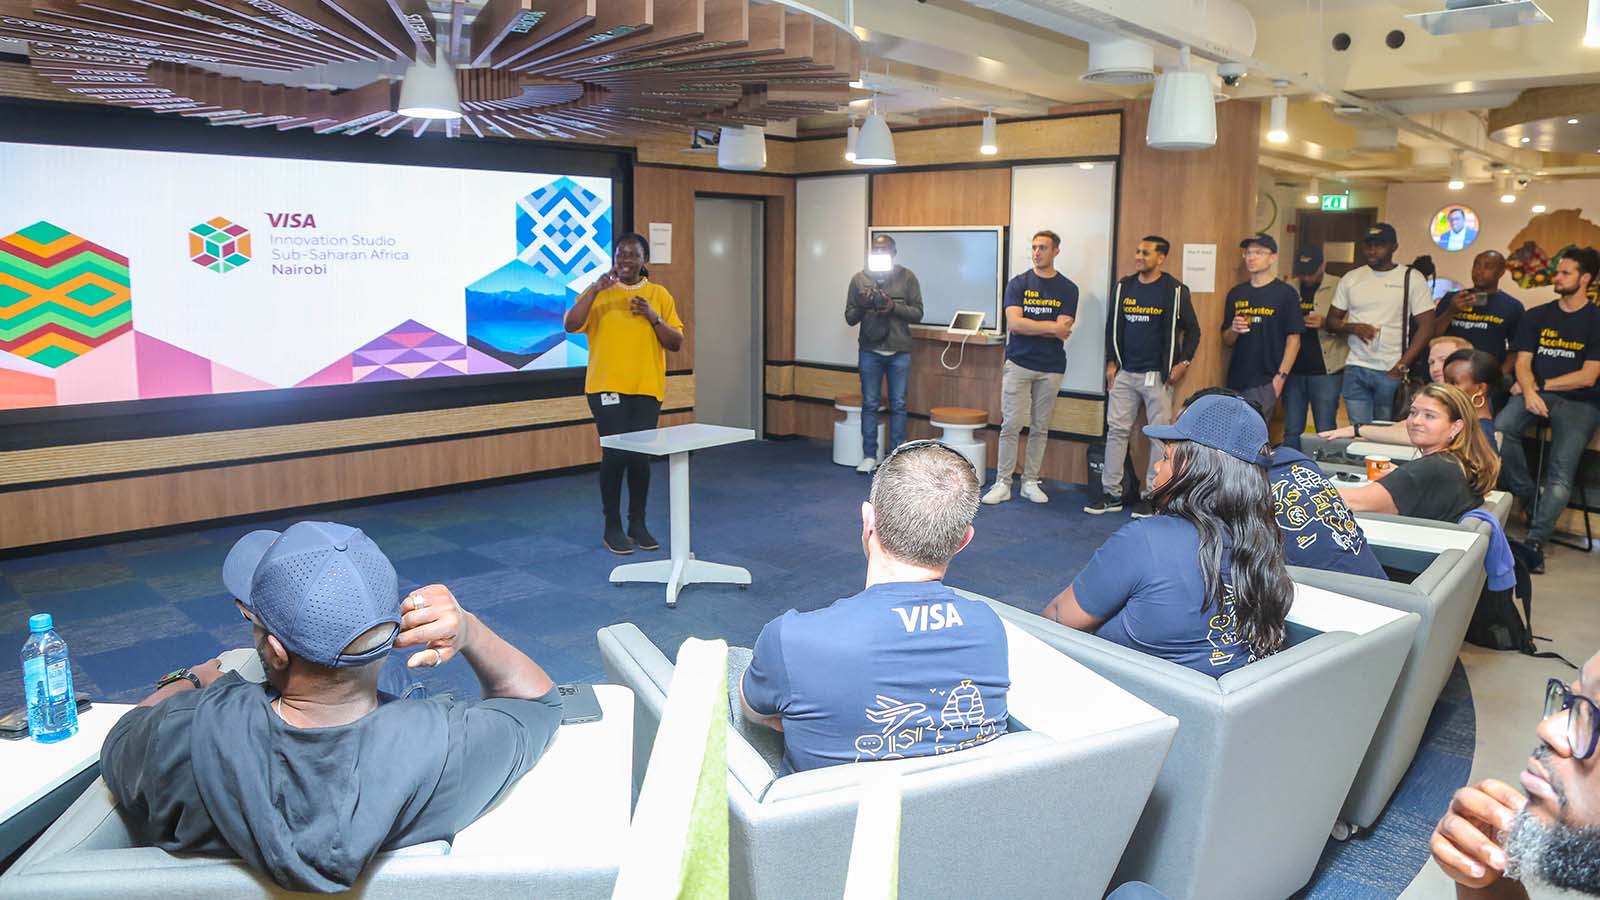 People listening and watching the presentation on a tour of Visa’s Innovation Studio in Kenya